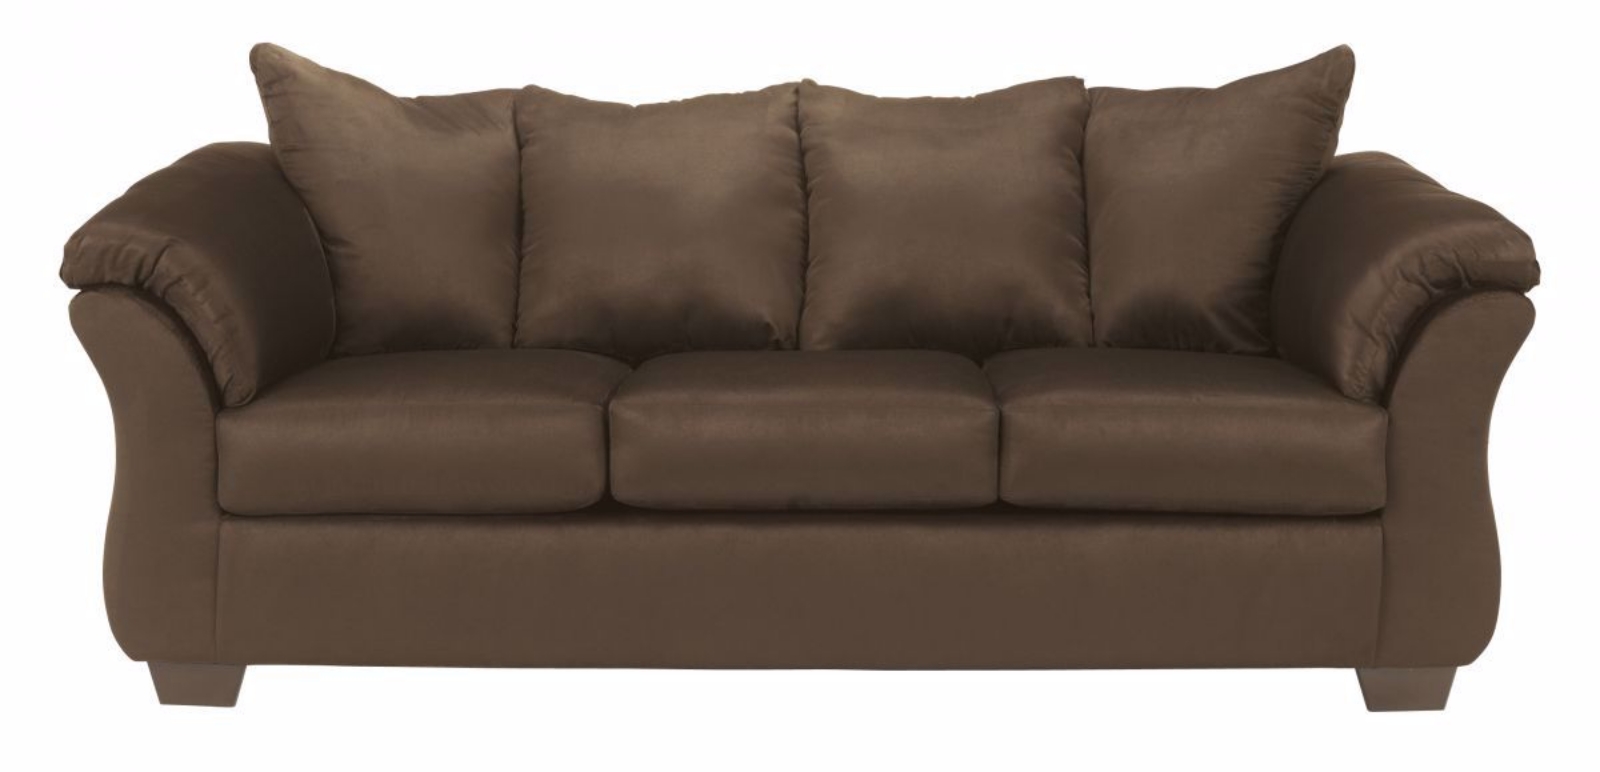 Picture of Darcy Sofa